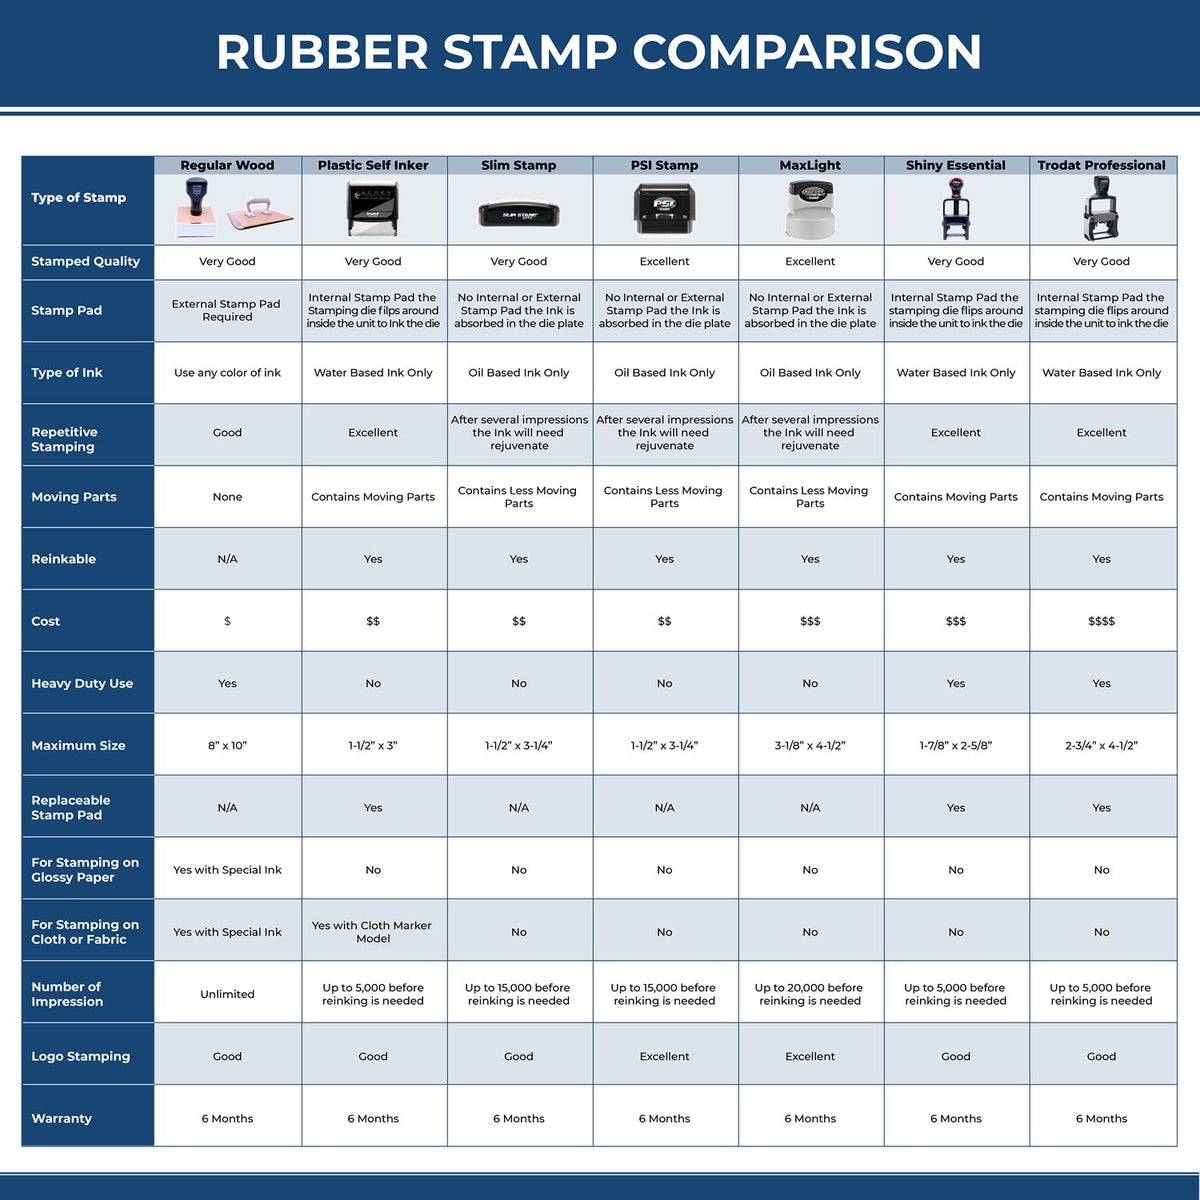 A comparison chart for the different types of mount models available for the Self-Inking Texas PE Stamp.